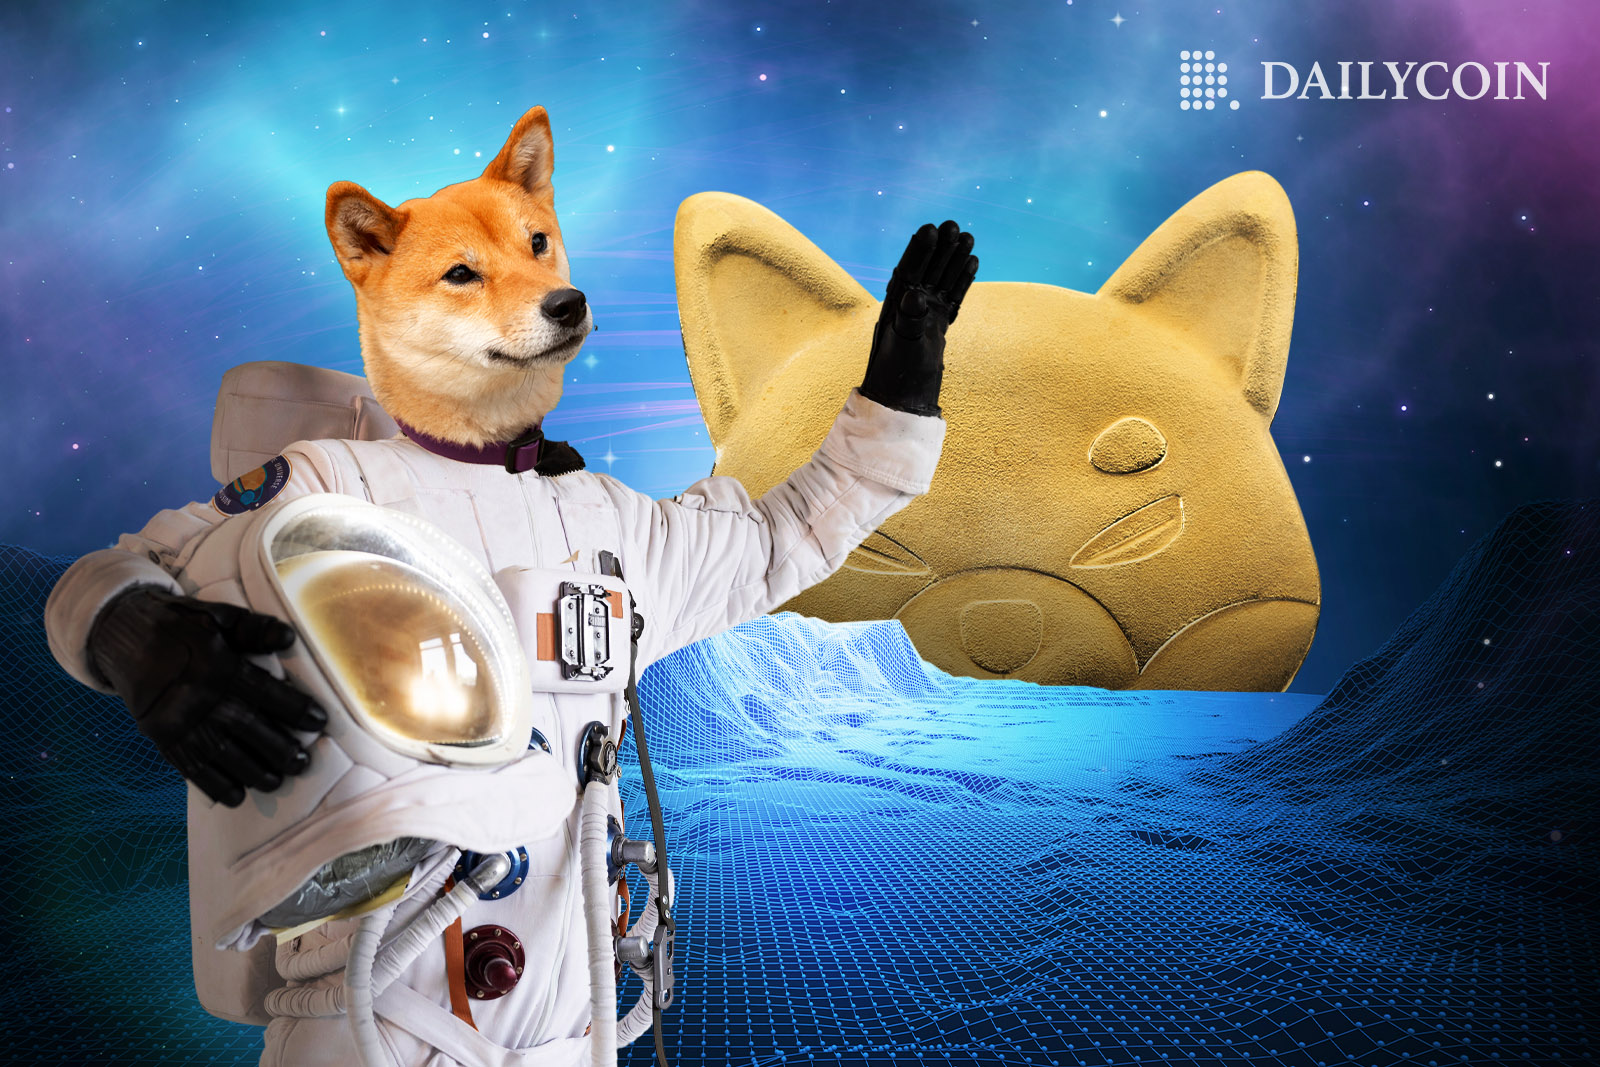 Shiba Inu astronaut in a space suit greeting fans on the launch of Shibarium.